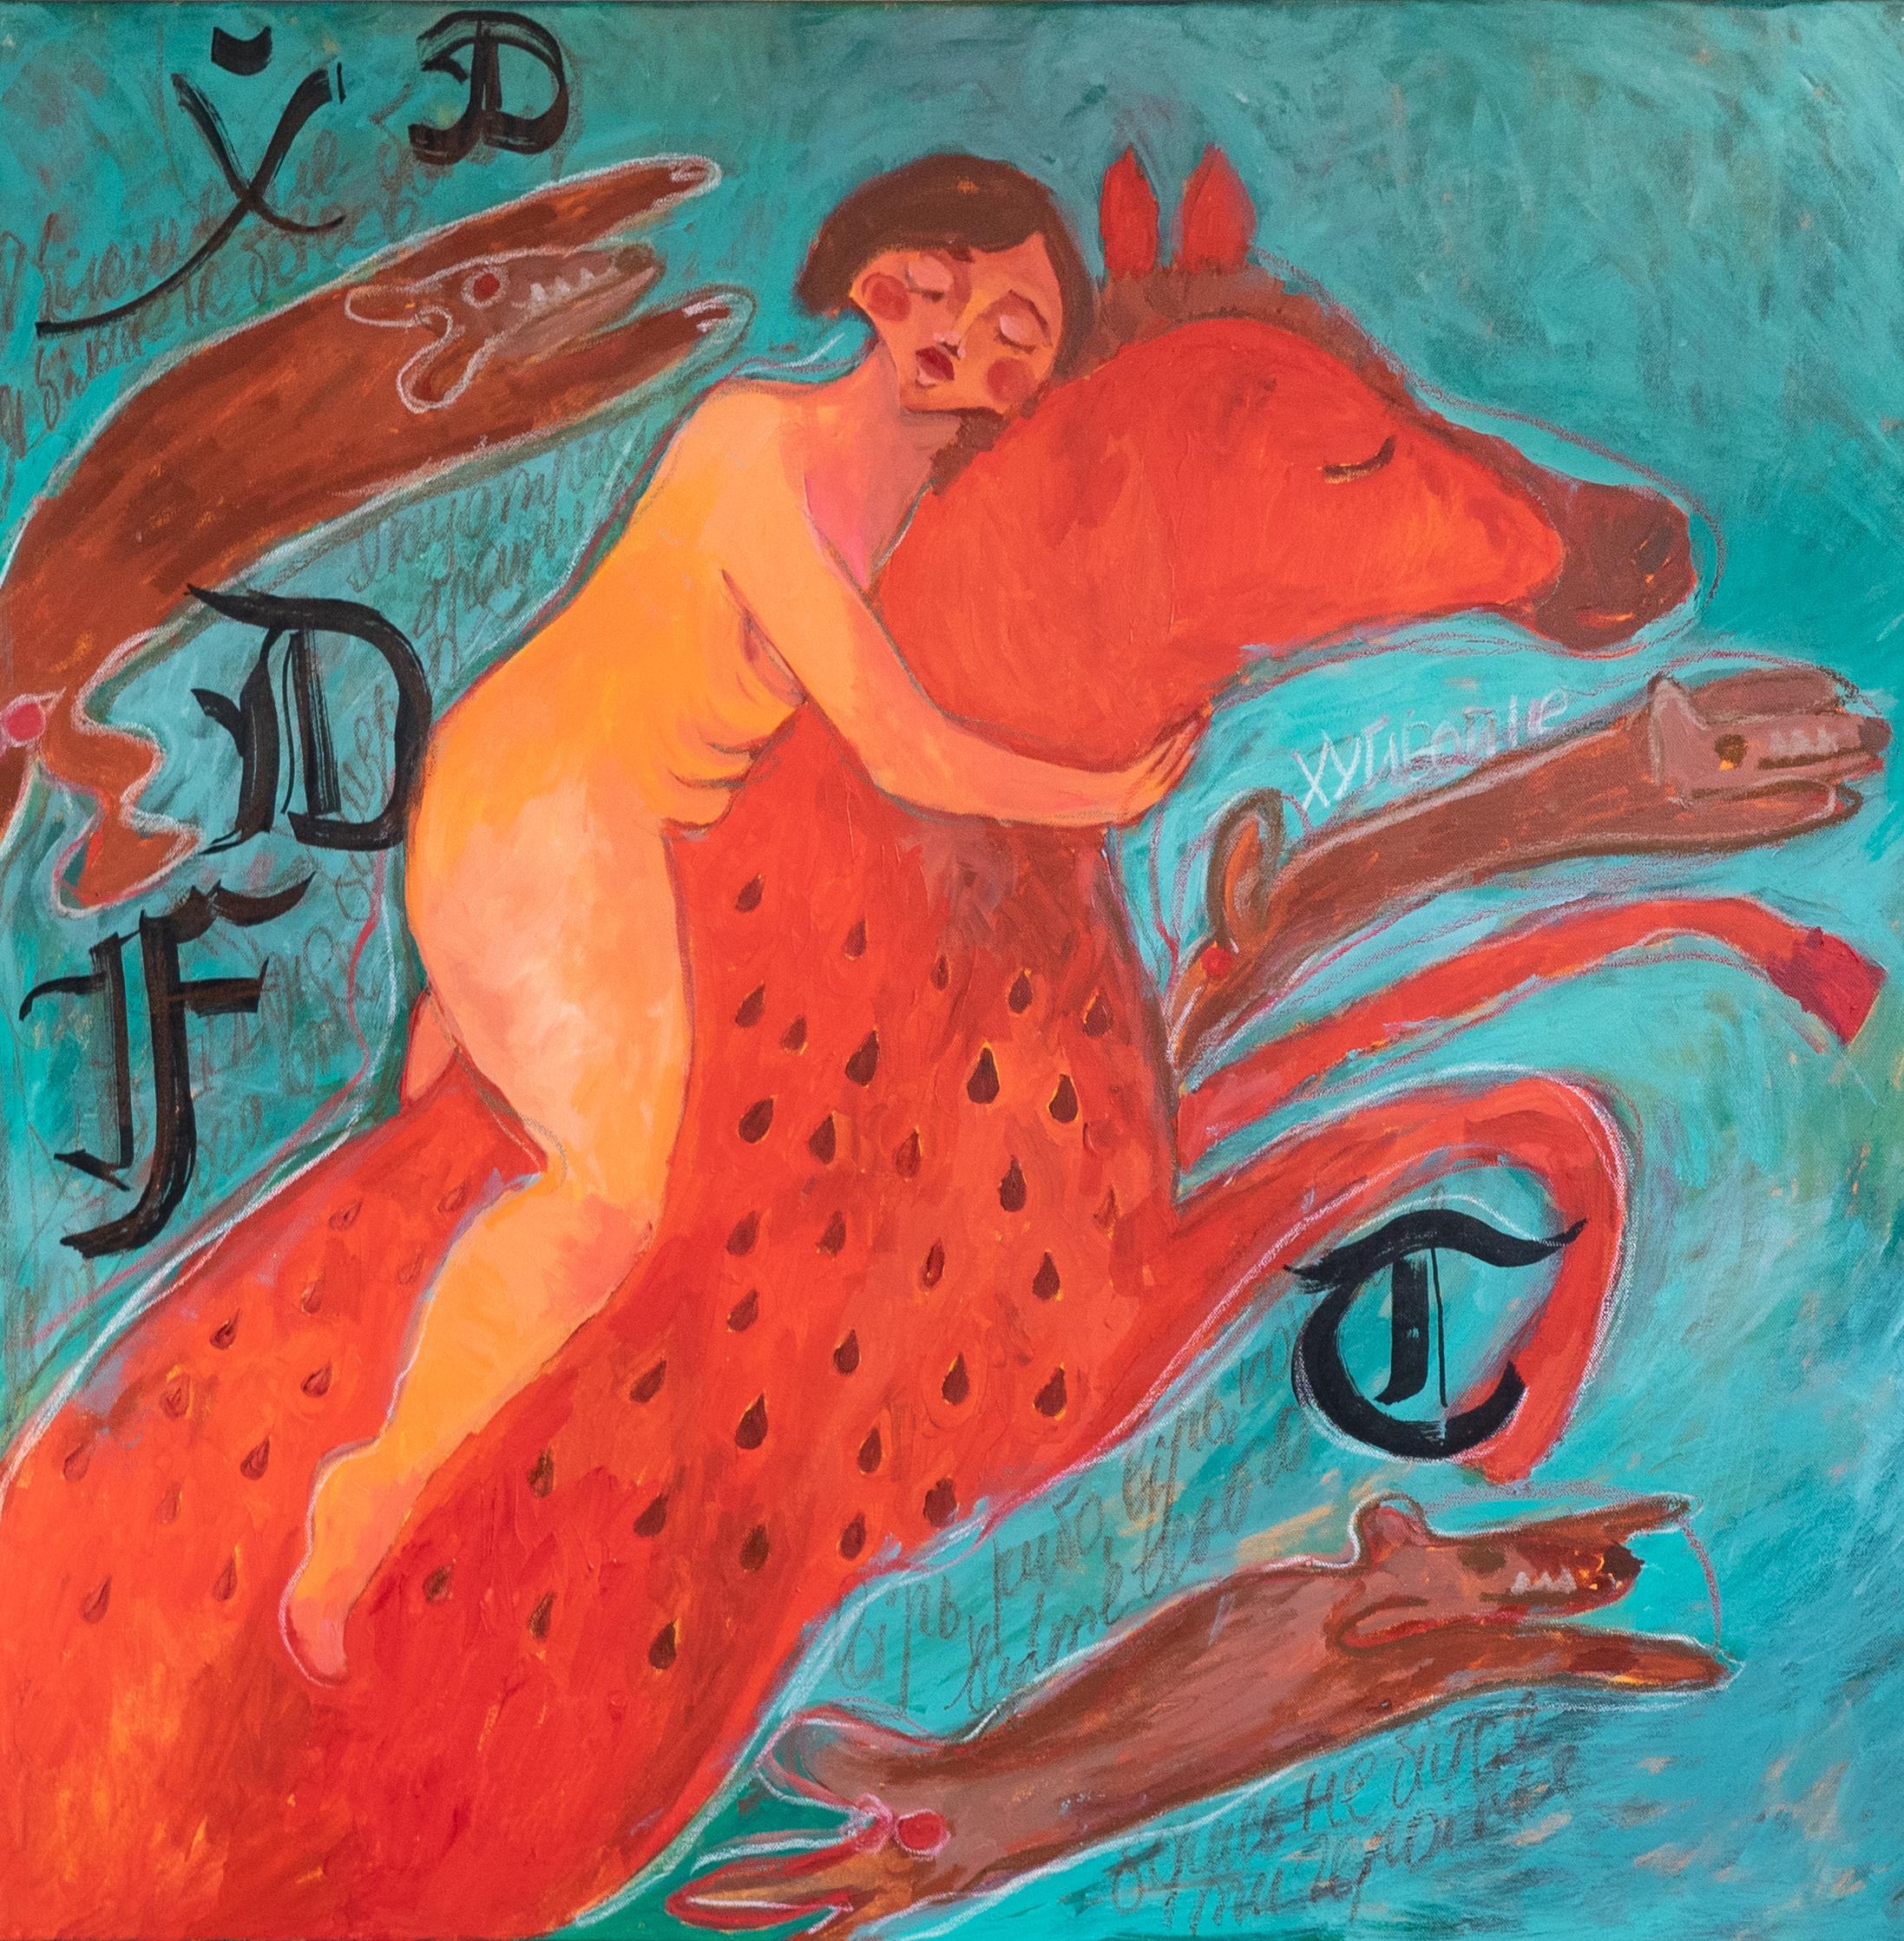 ABOUT THE ARTWORK

The painting titled "I'm Not Afraid Anymore" is a visceral representation of triumph over fear. It showcases a figure in a gentle embrace with a large, vibrant red creature, possibly a mythical embodiment of challenges or fears.